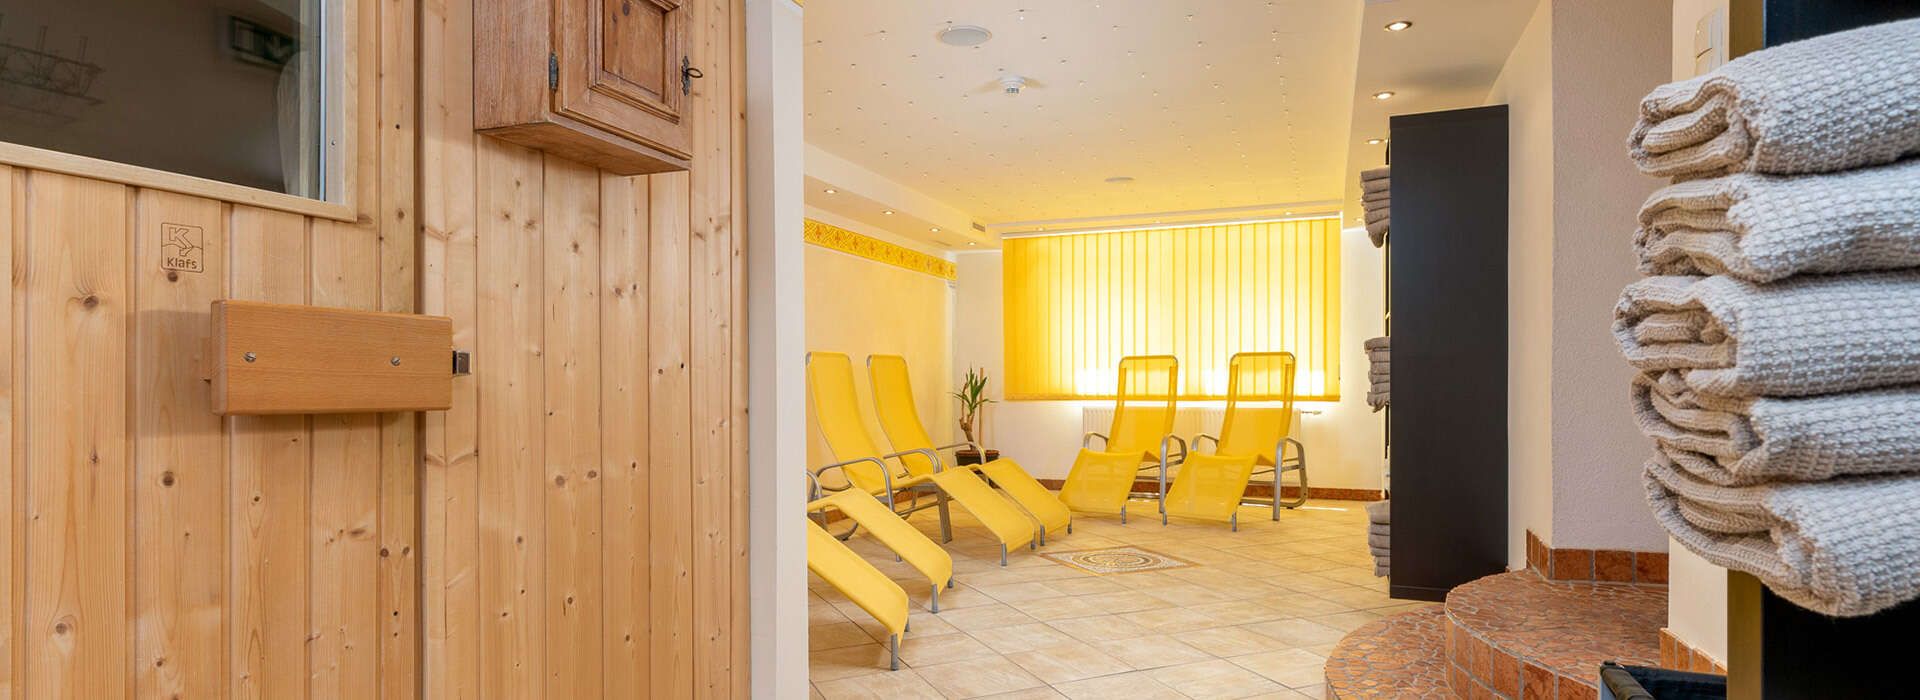 Relaxation room with sauna in Hotel Schlossberg Tirol